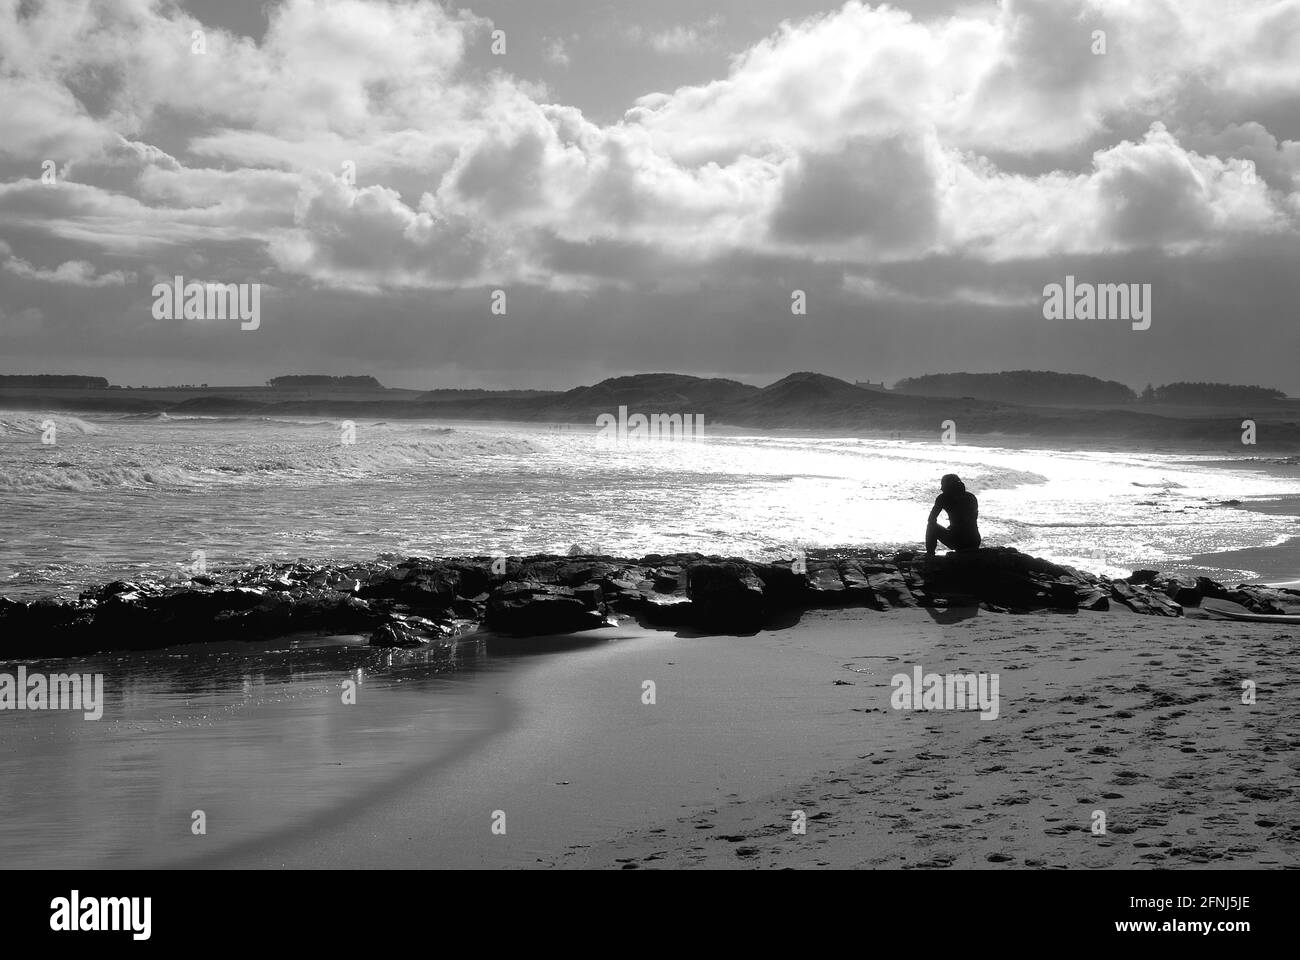 A mono image of a single figure in silhouette sitting on rocks at the coast and looking out to sea with dunes and drifting clouds as background Stock Photo